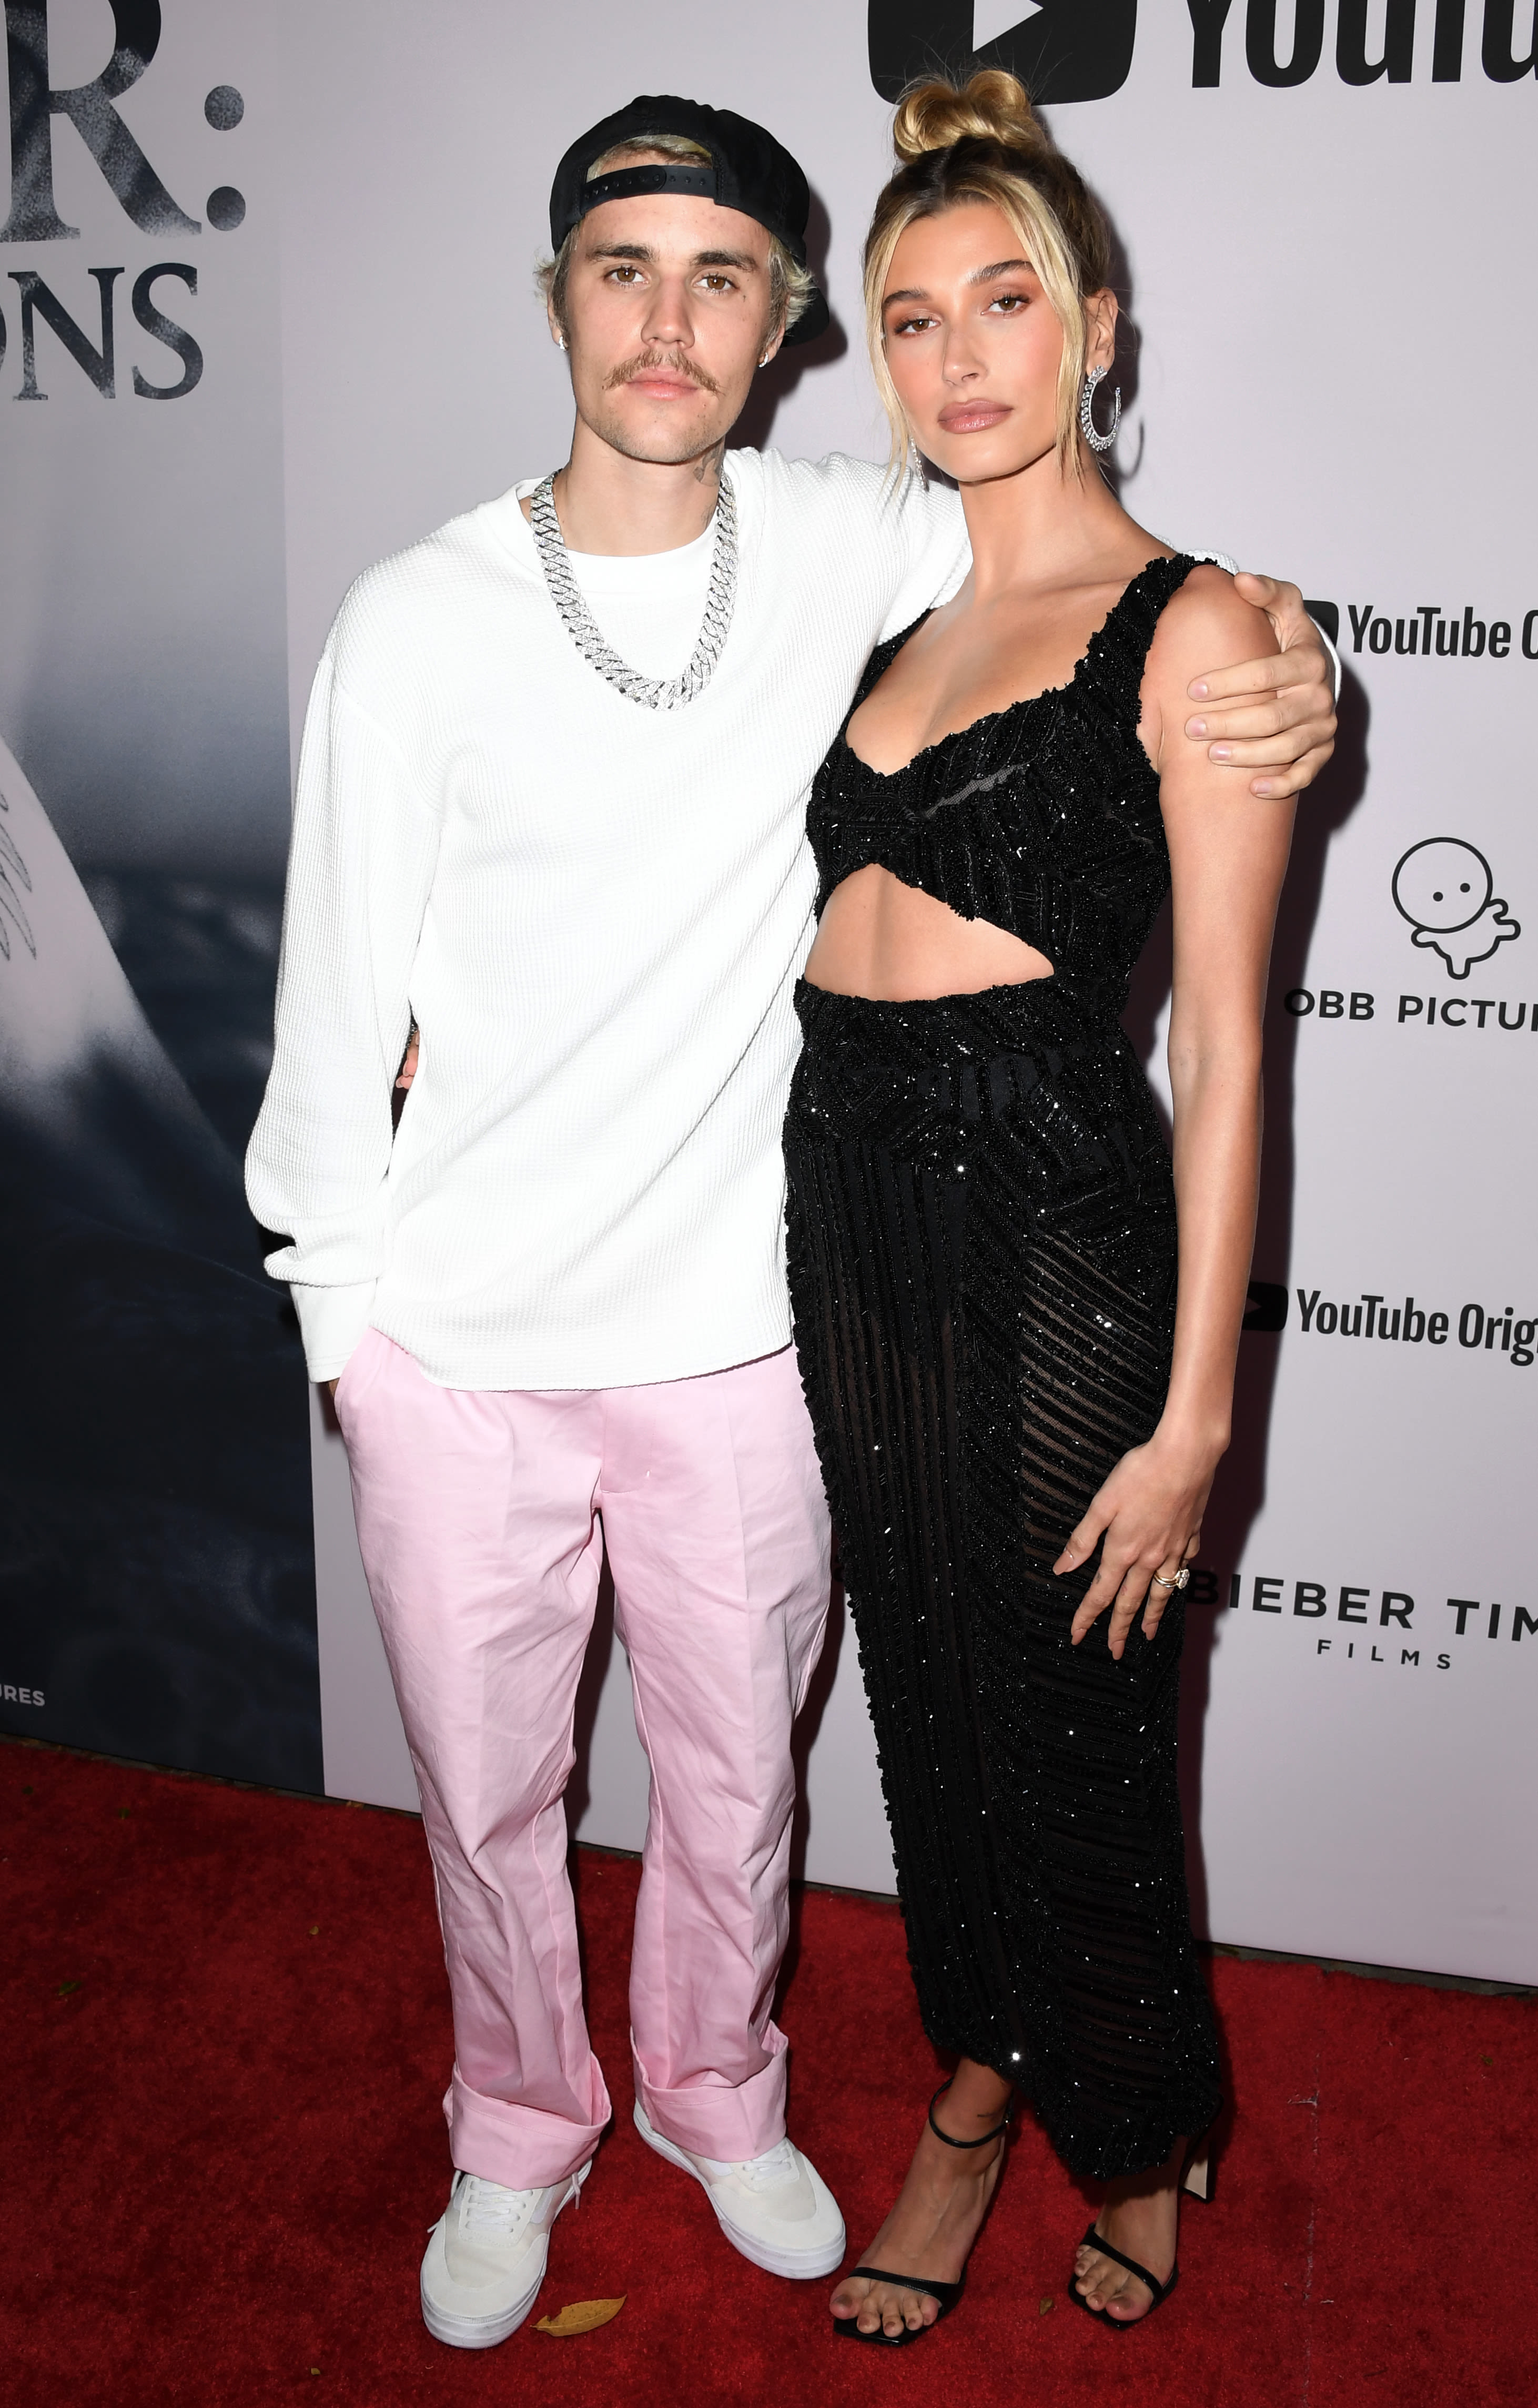 Push Present! Justin Bieber Spoiling Pregnant Wife Hailey With Lavish $700,000 Diamond Ring